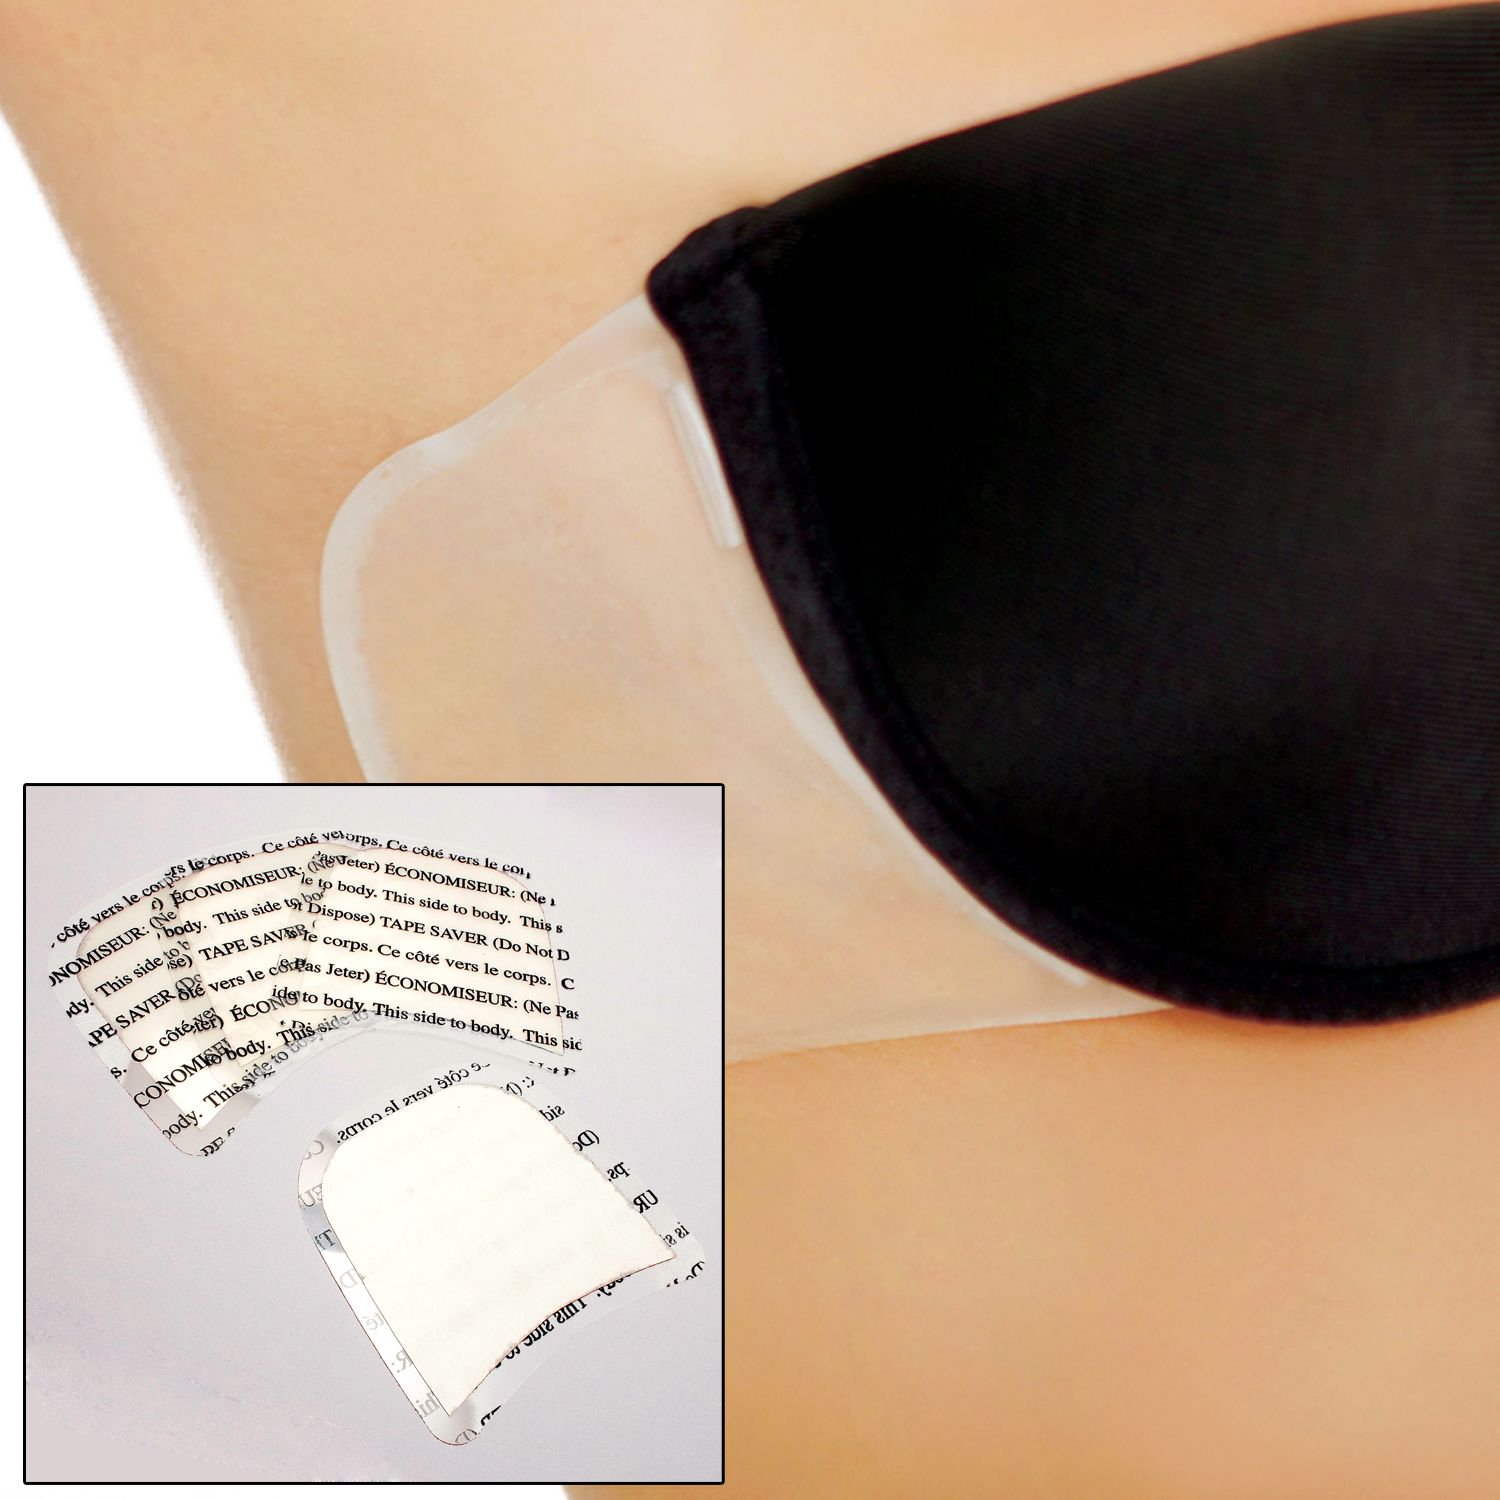 replacement tape for backless bra